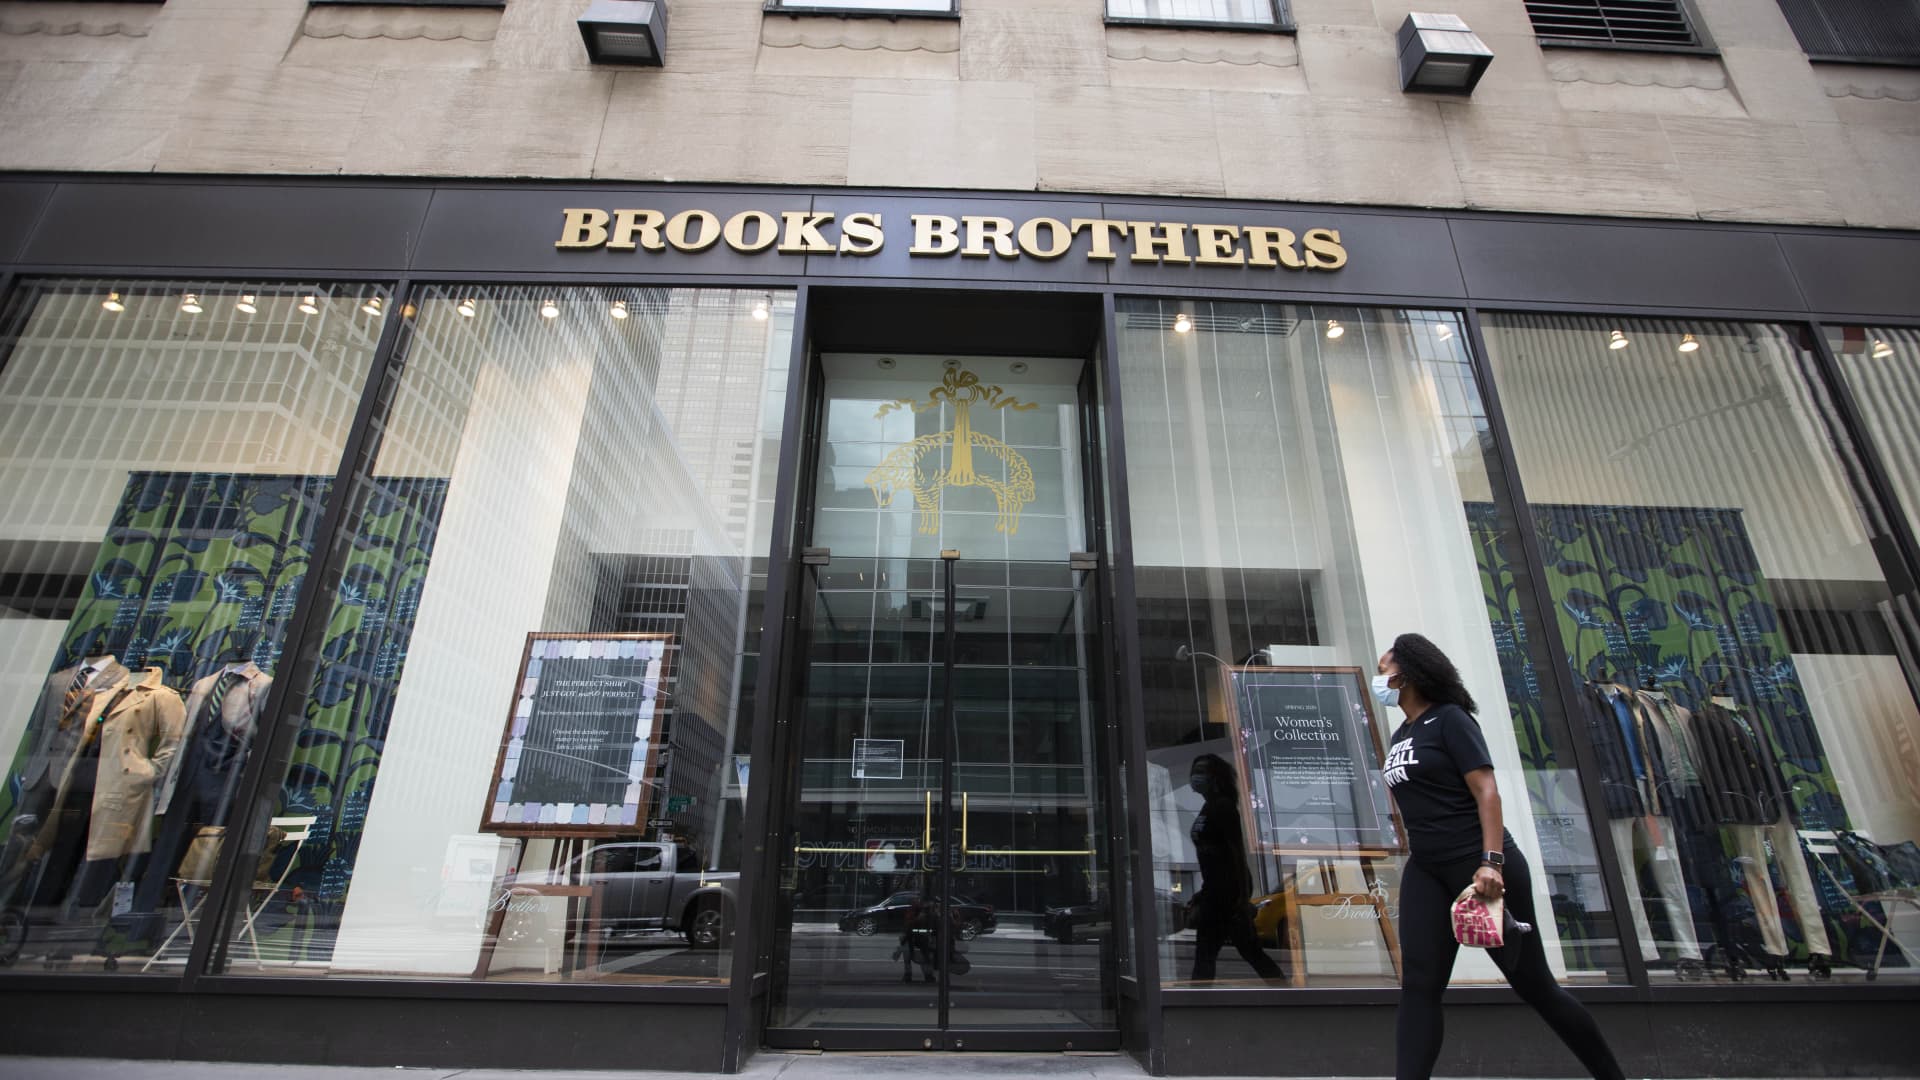 Brooks Brothers, one of the oldest apparel retailers in the United States, filed for bankruptcy protection on July 8, 2020 as the coronavirus pandemic continues to impact businesses.